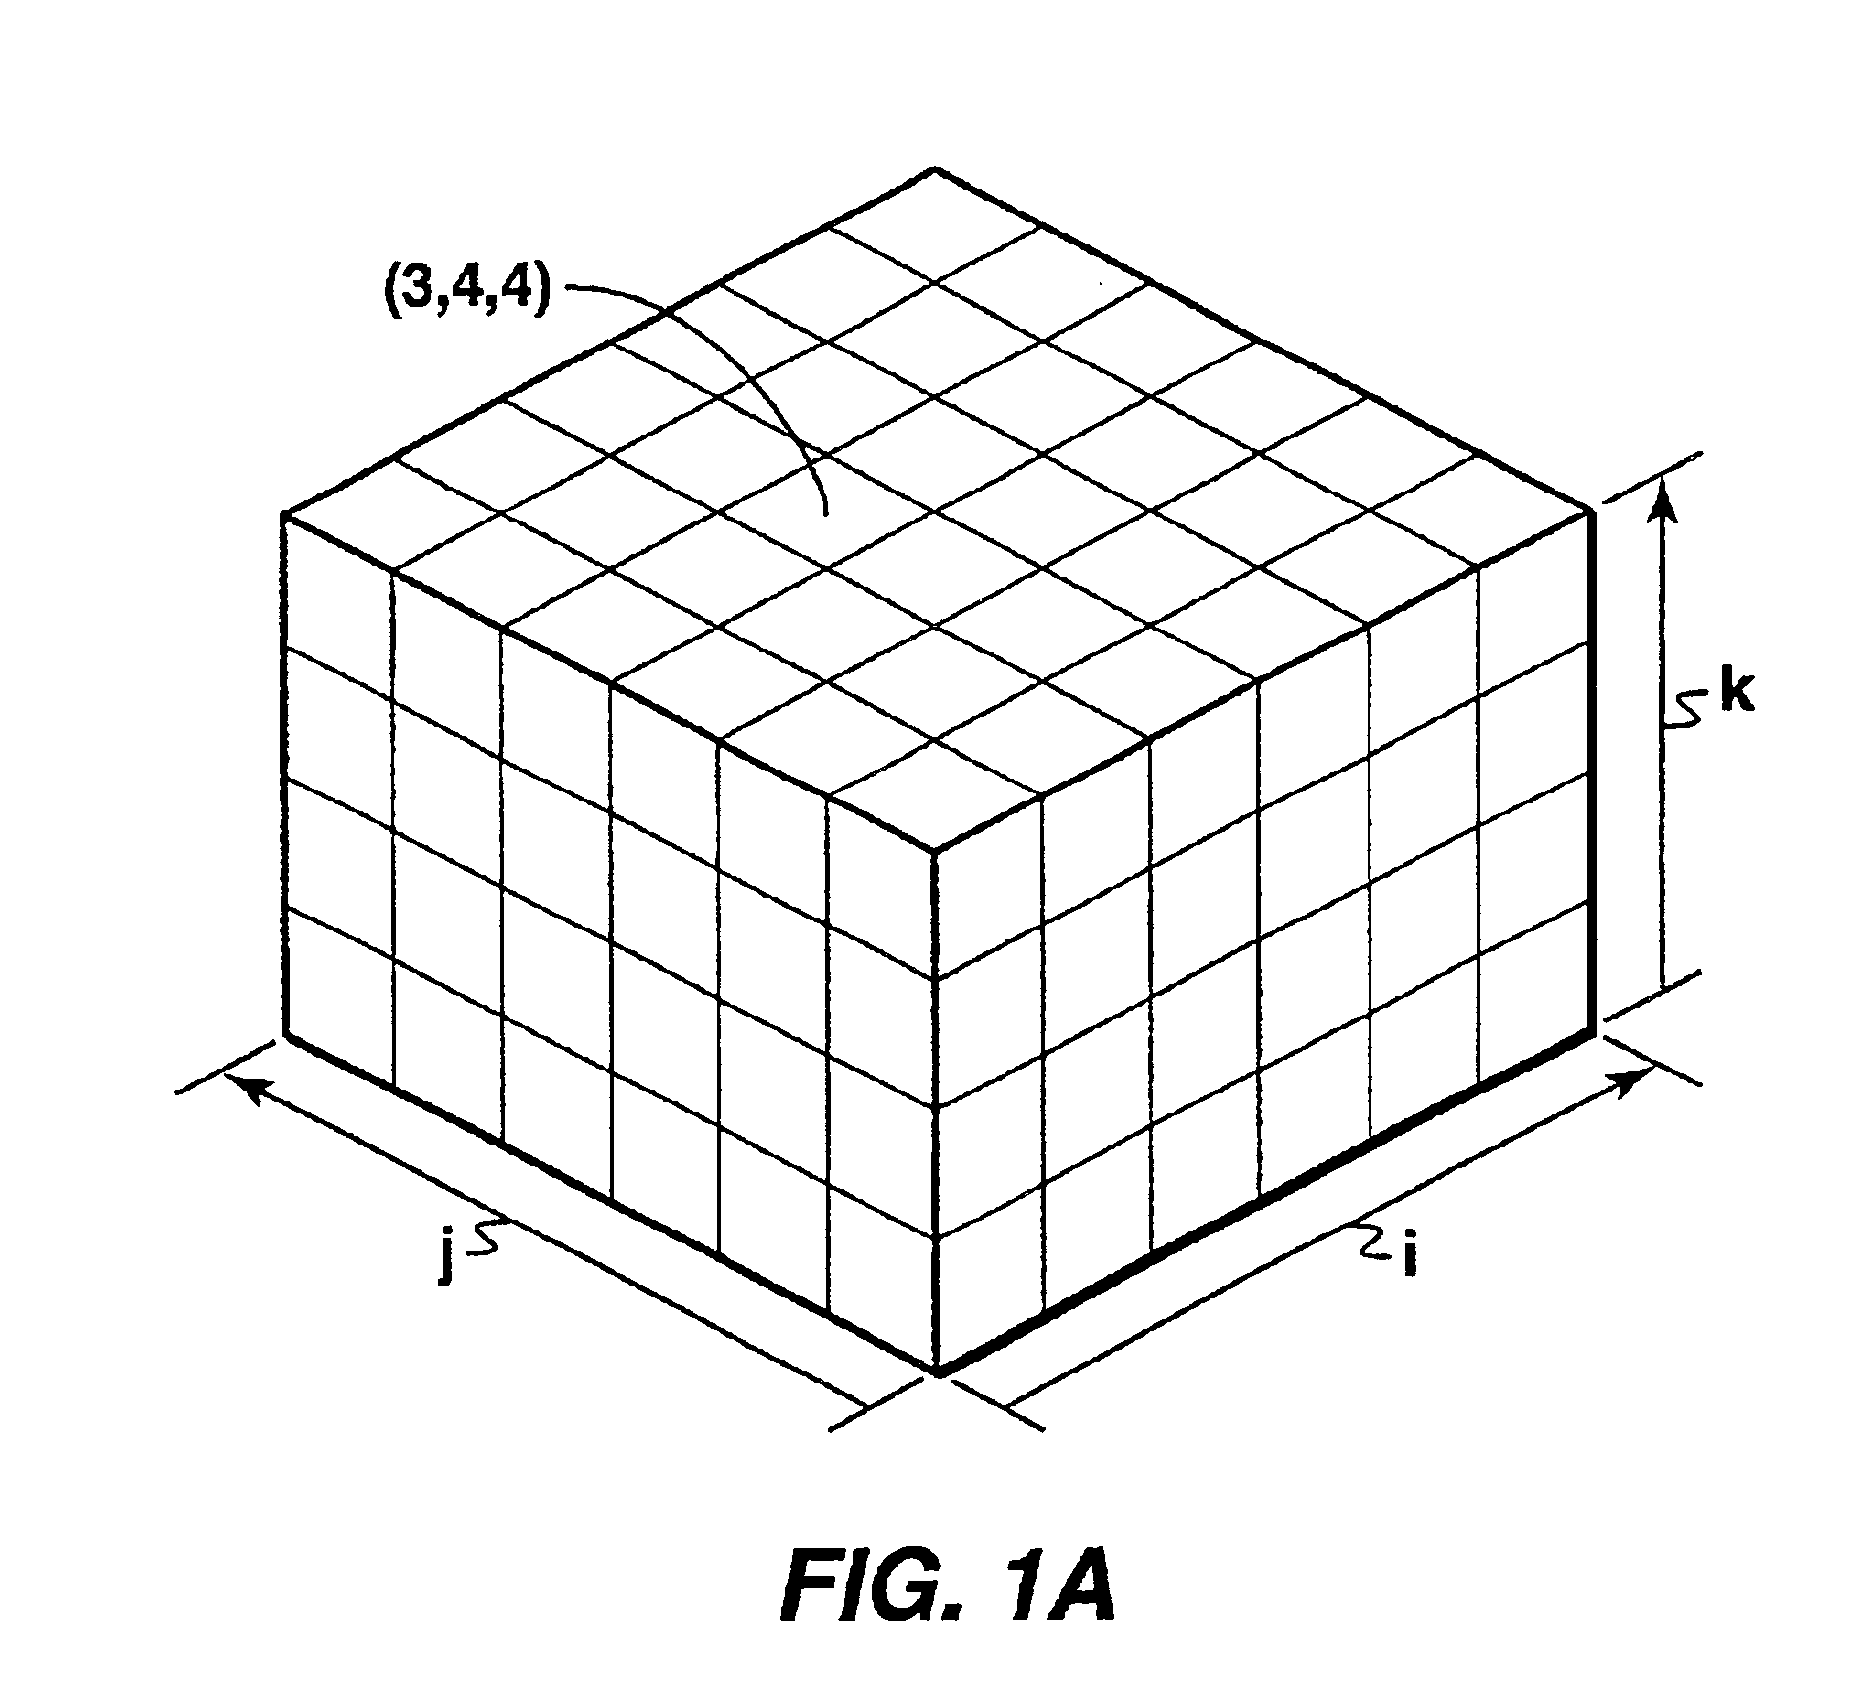 Method and program for simulating a physical system using object-oriented programming